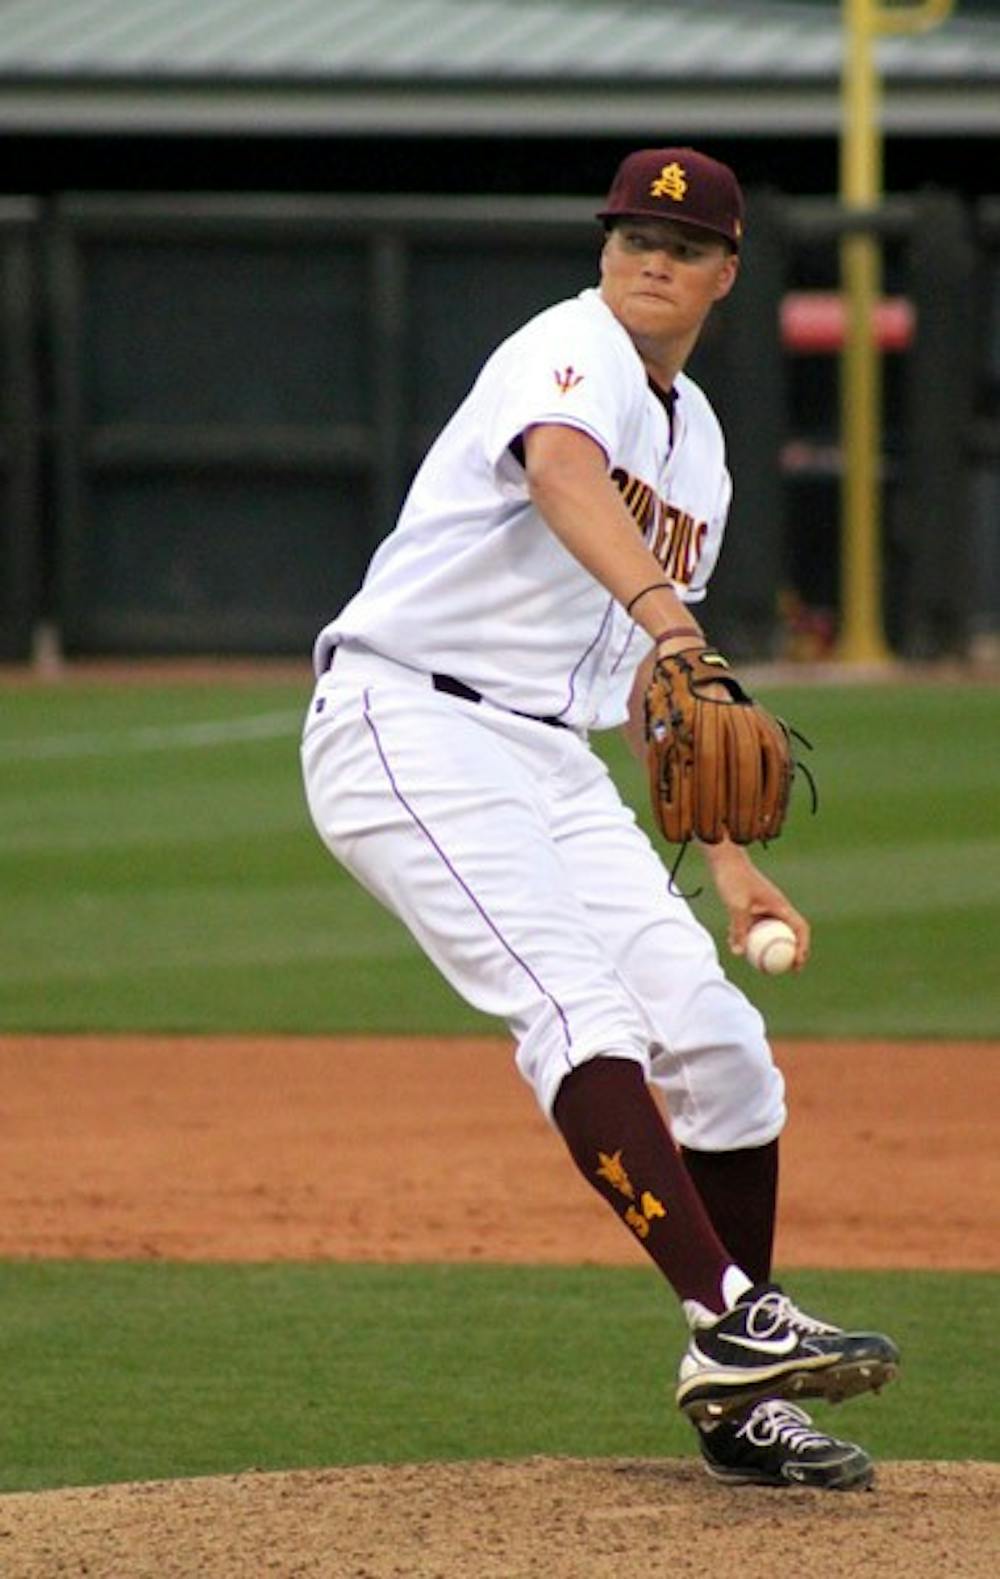 Sophomore pitcher Ryan Burr winds up for a pitch during the Sun Devils' 6-6 tie with Gonzaga at Surprise Stadium on March 3, 2013. (Hector Salas Almeida/The State Press)